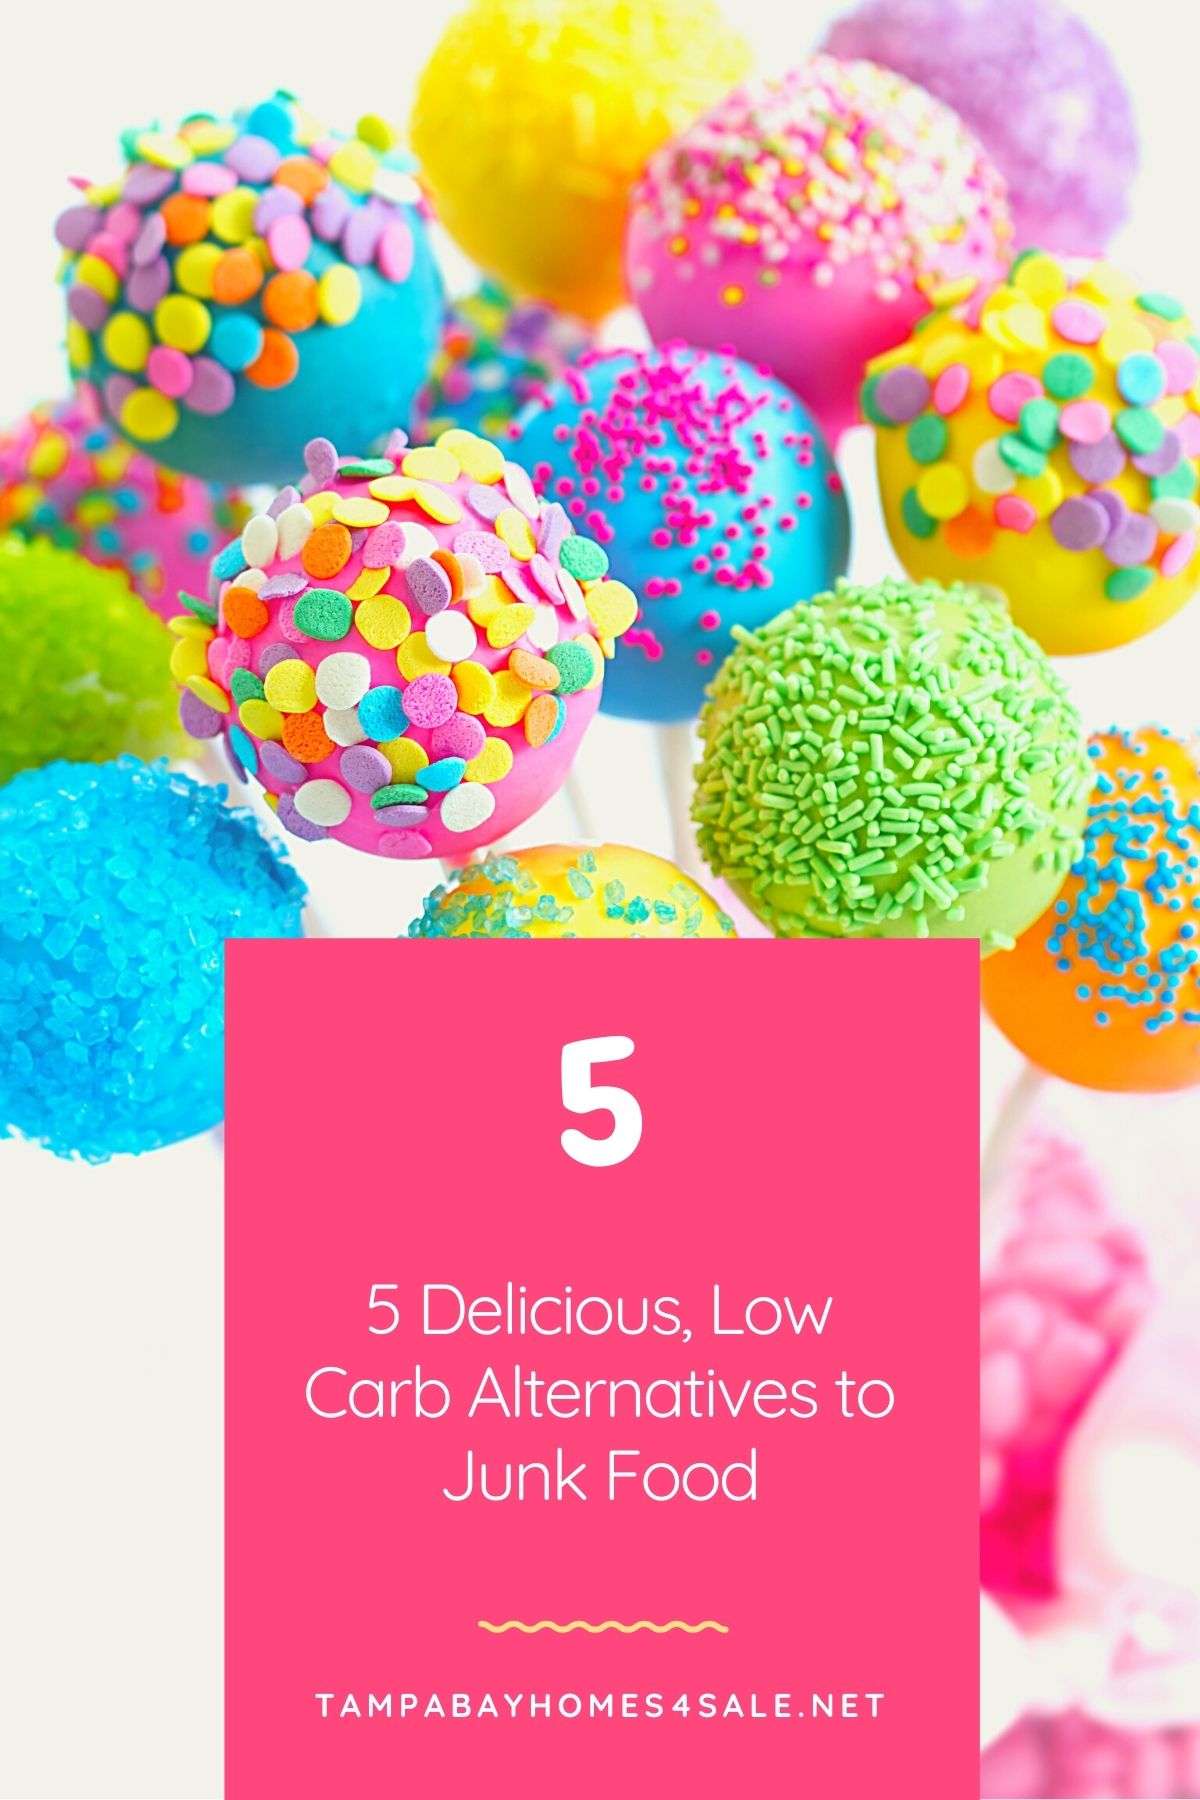 5 Delicious Low Carb Alternatives to Junk Food